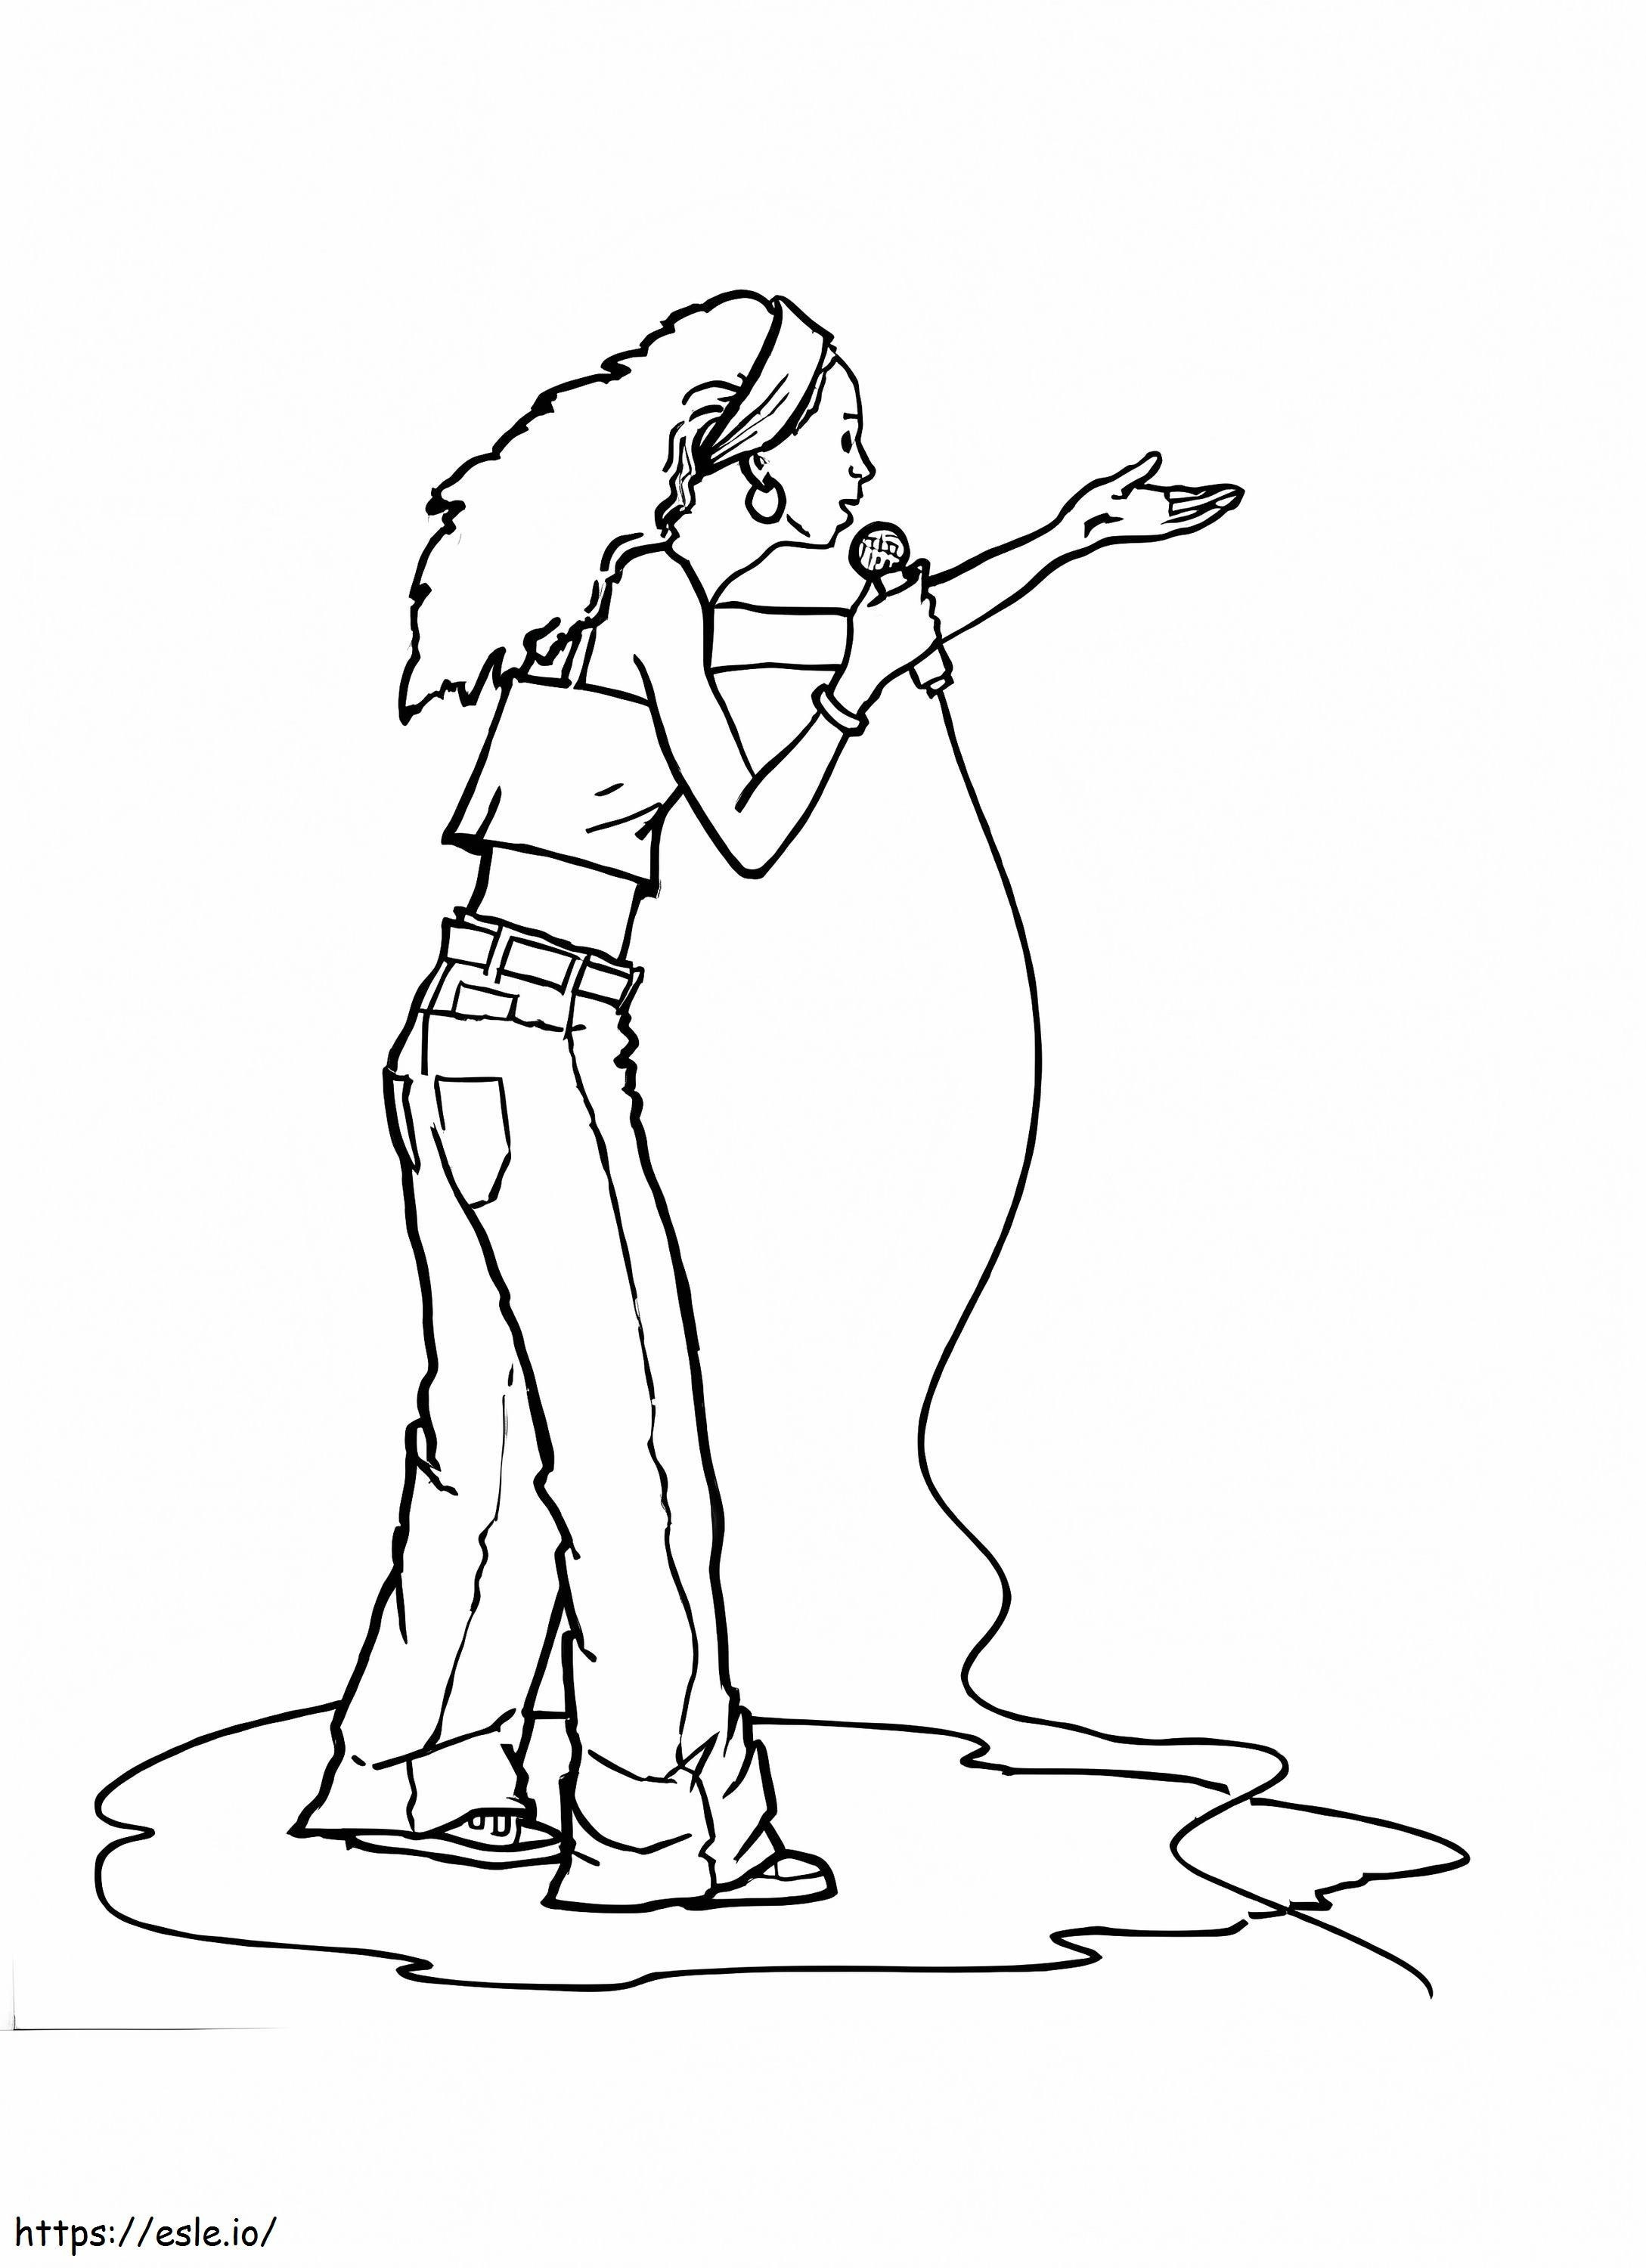 Singer 2 coloring page